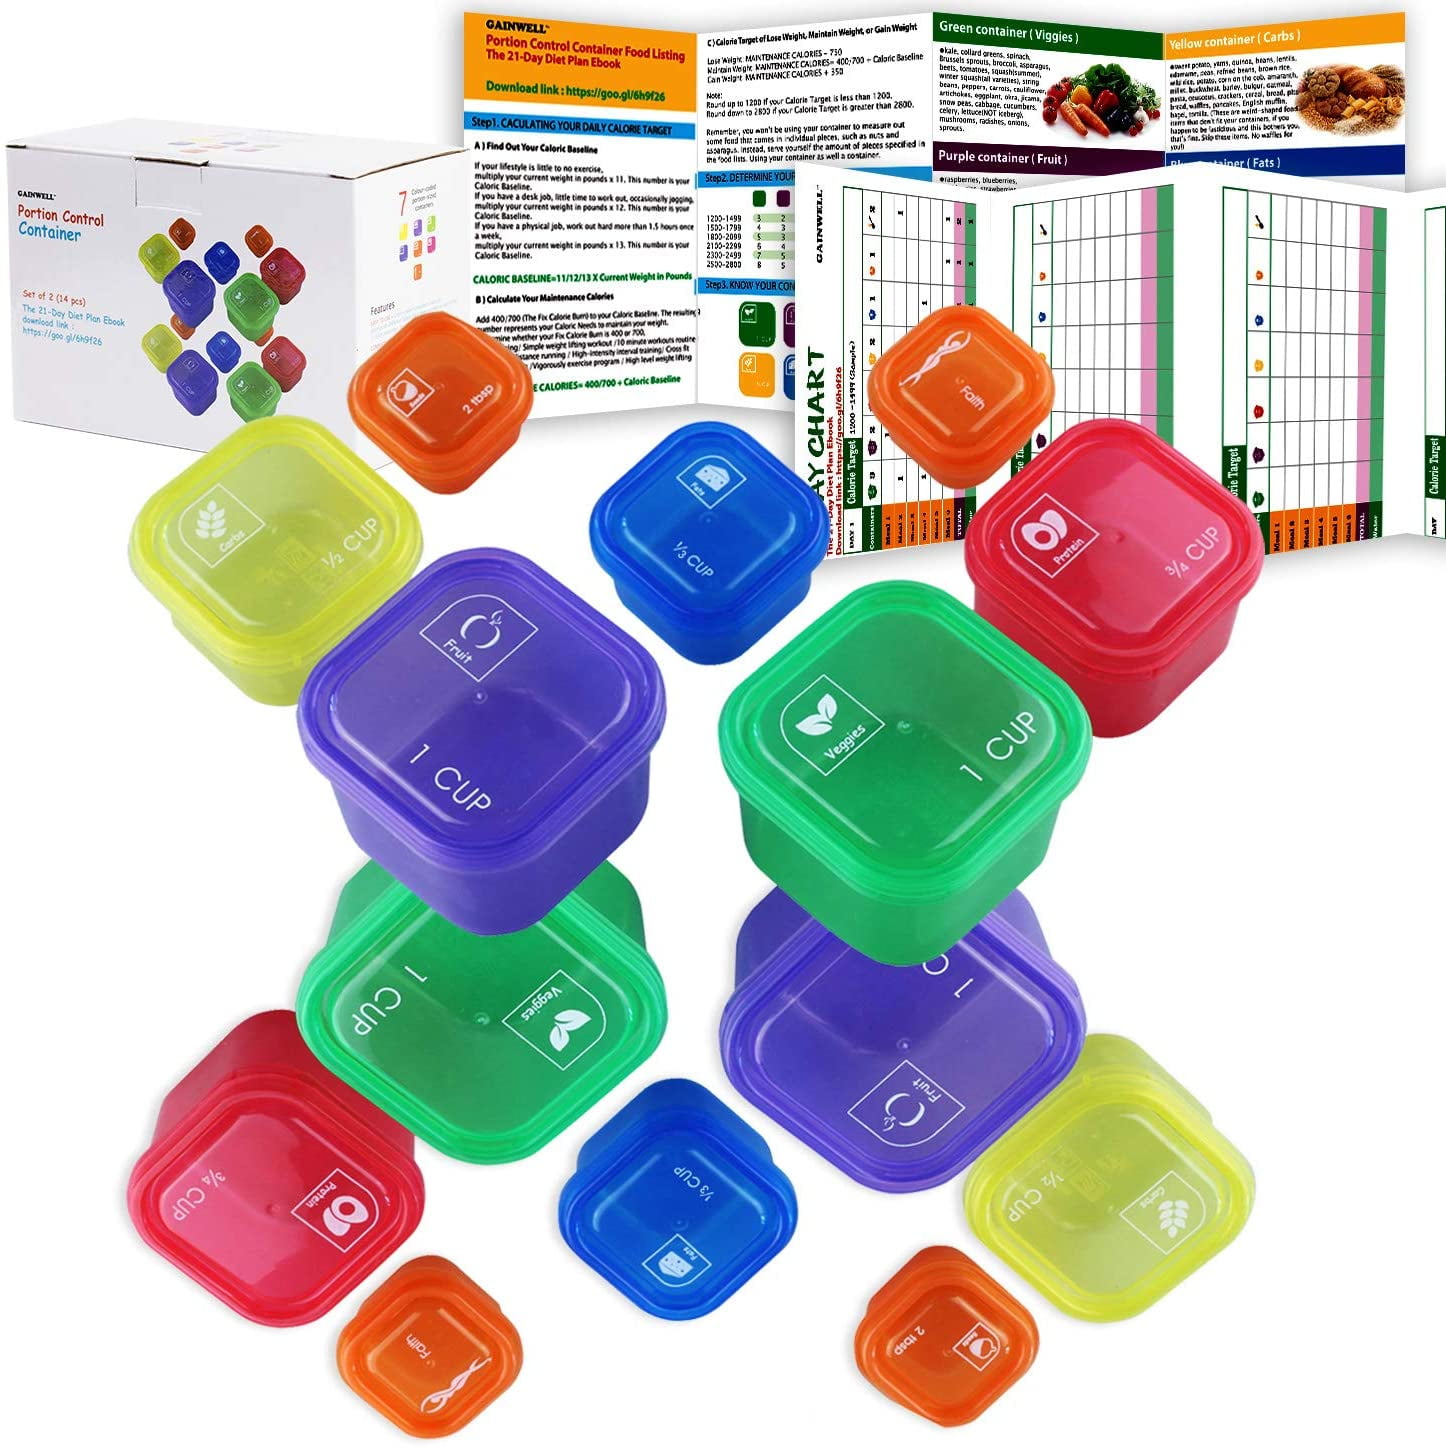 Efficient Nutrition Portion Control Containers DELUXE Kit (14-Piece) with  COMPLETE GUIDE + 21 DAY PLANNER + RECIPE eBOOK BPA FREE Color Coded Meal